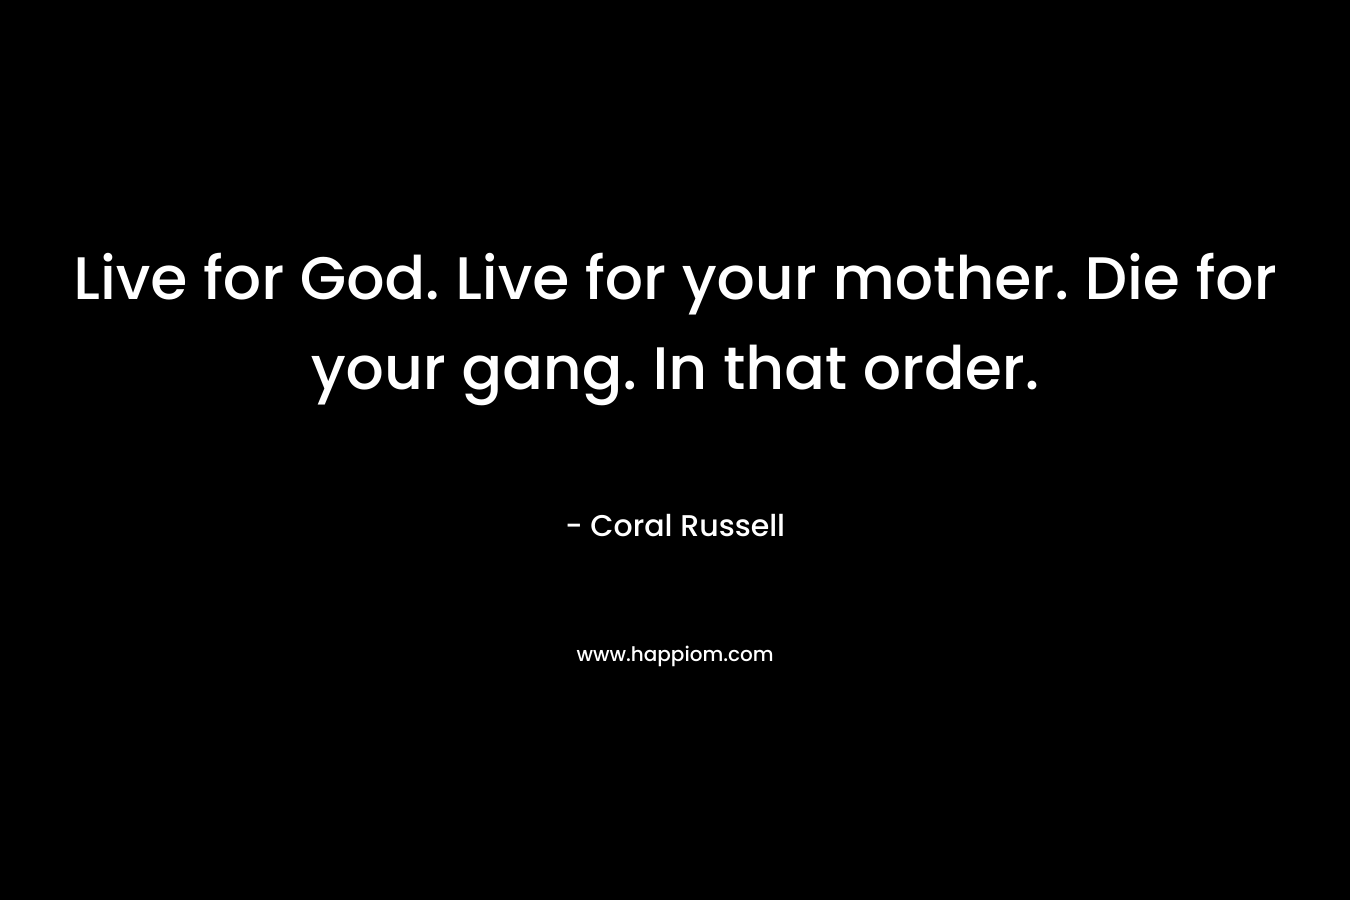 Live for God. Live for your mother. Die for your gang. In that order.